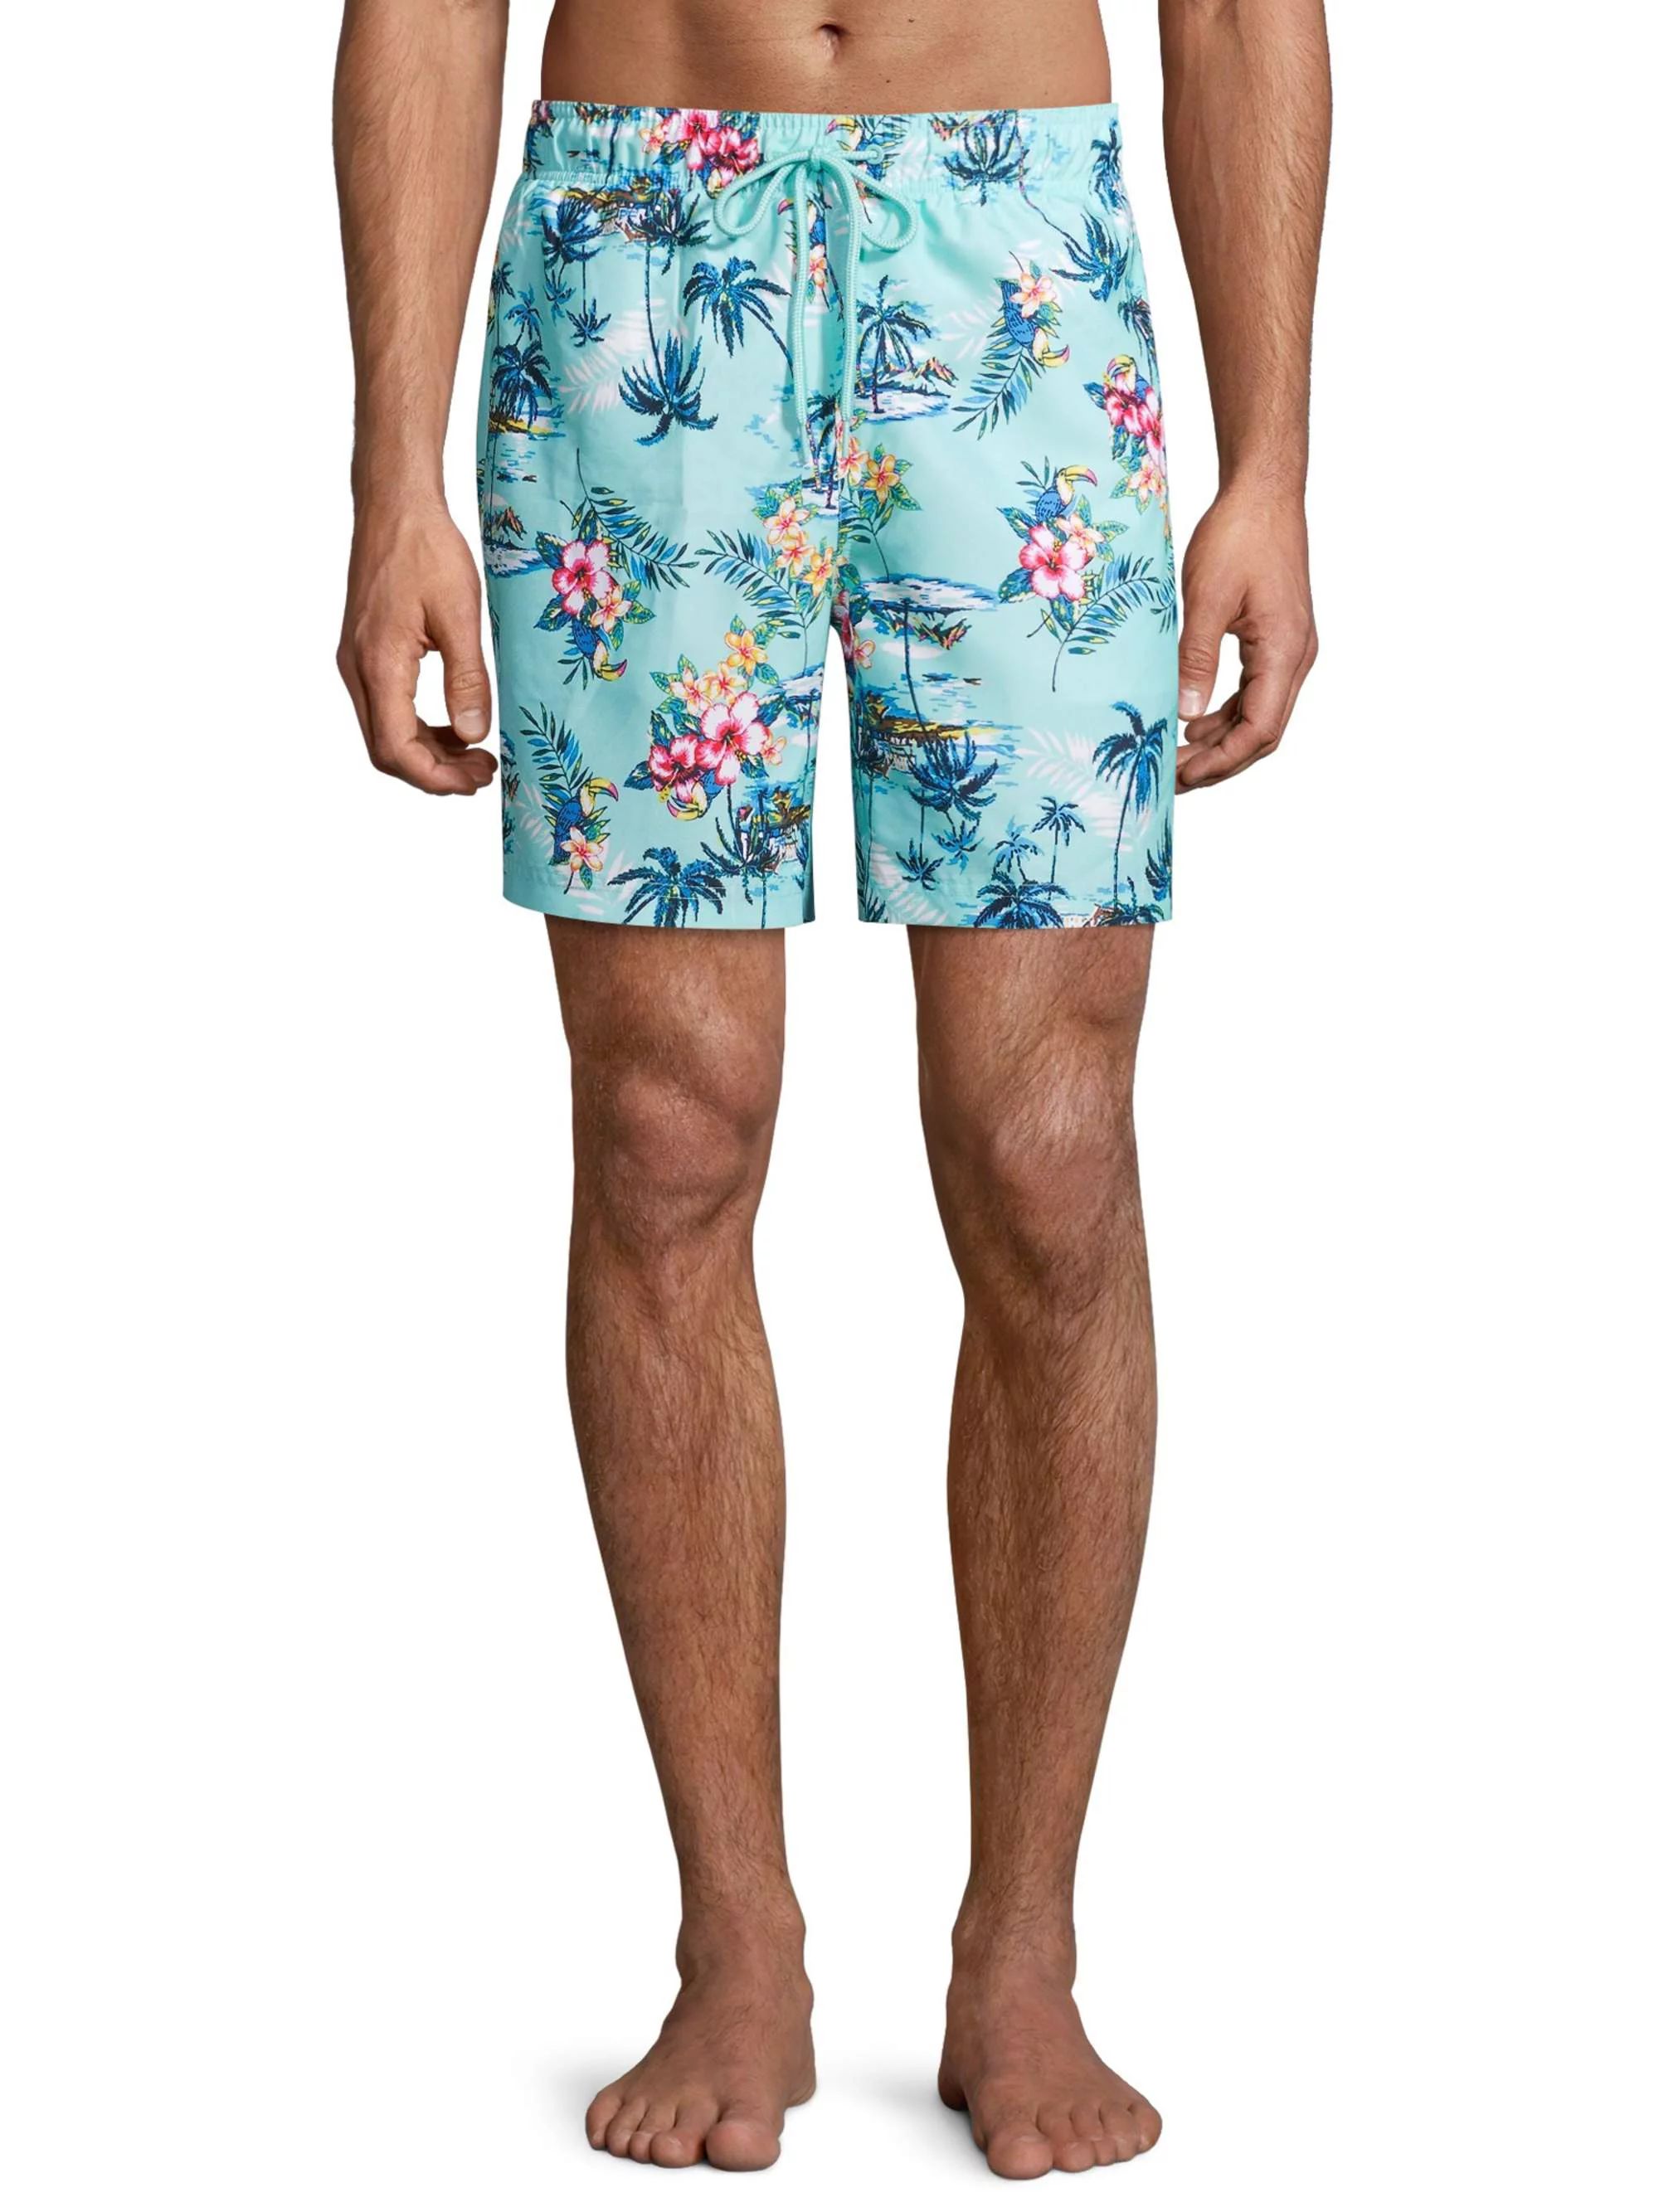 George Men's and Big Men's 6" Novelty Swim Trunk with Tropical Florals, up to Size 3XL | Walmart (US)